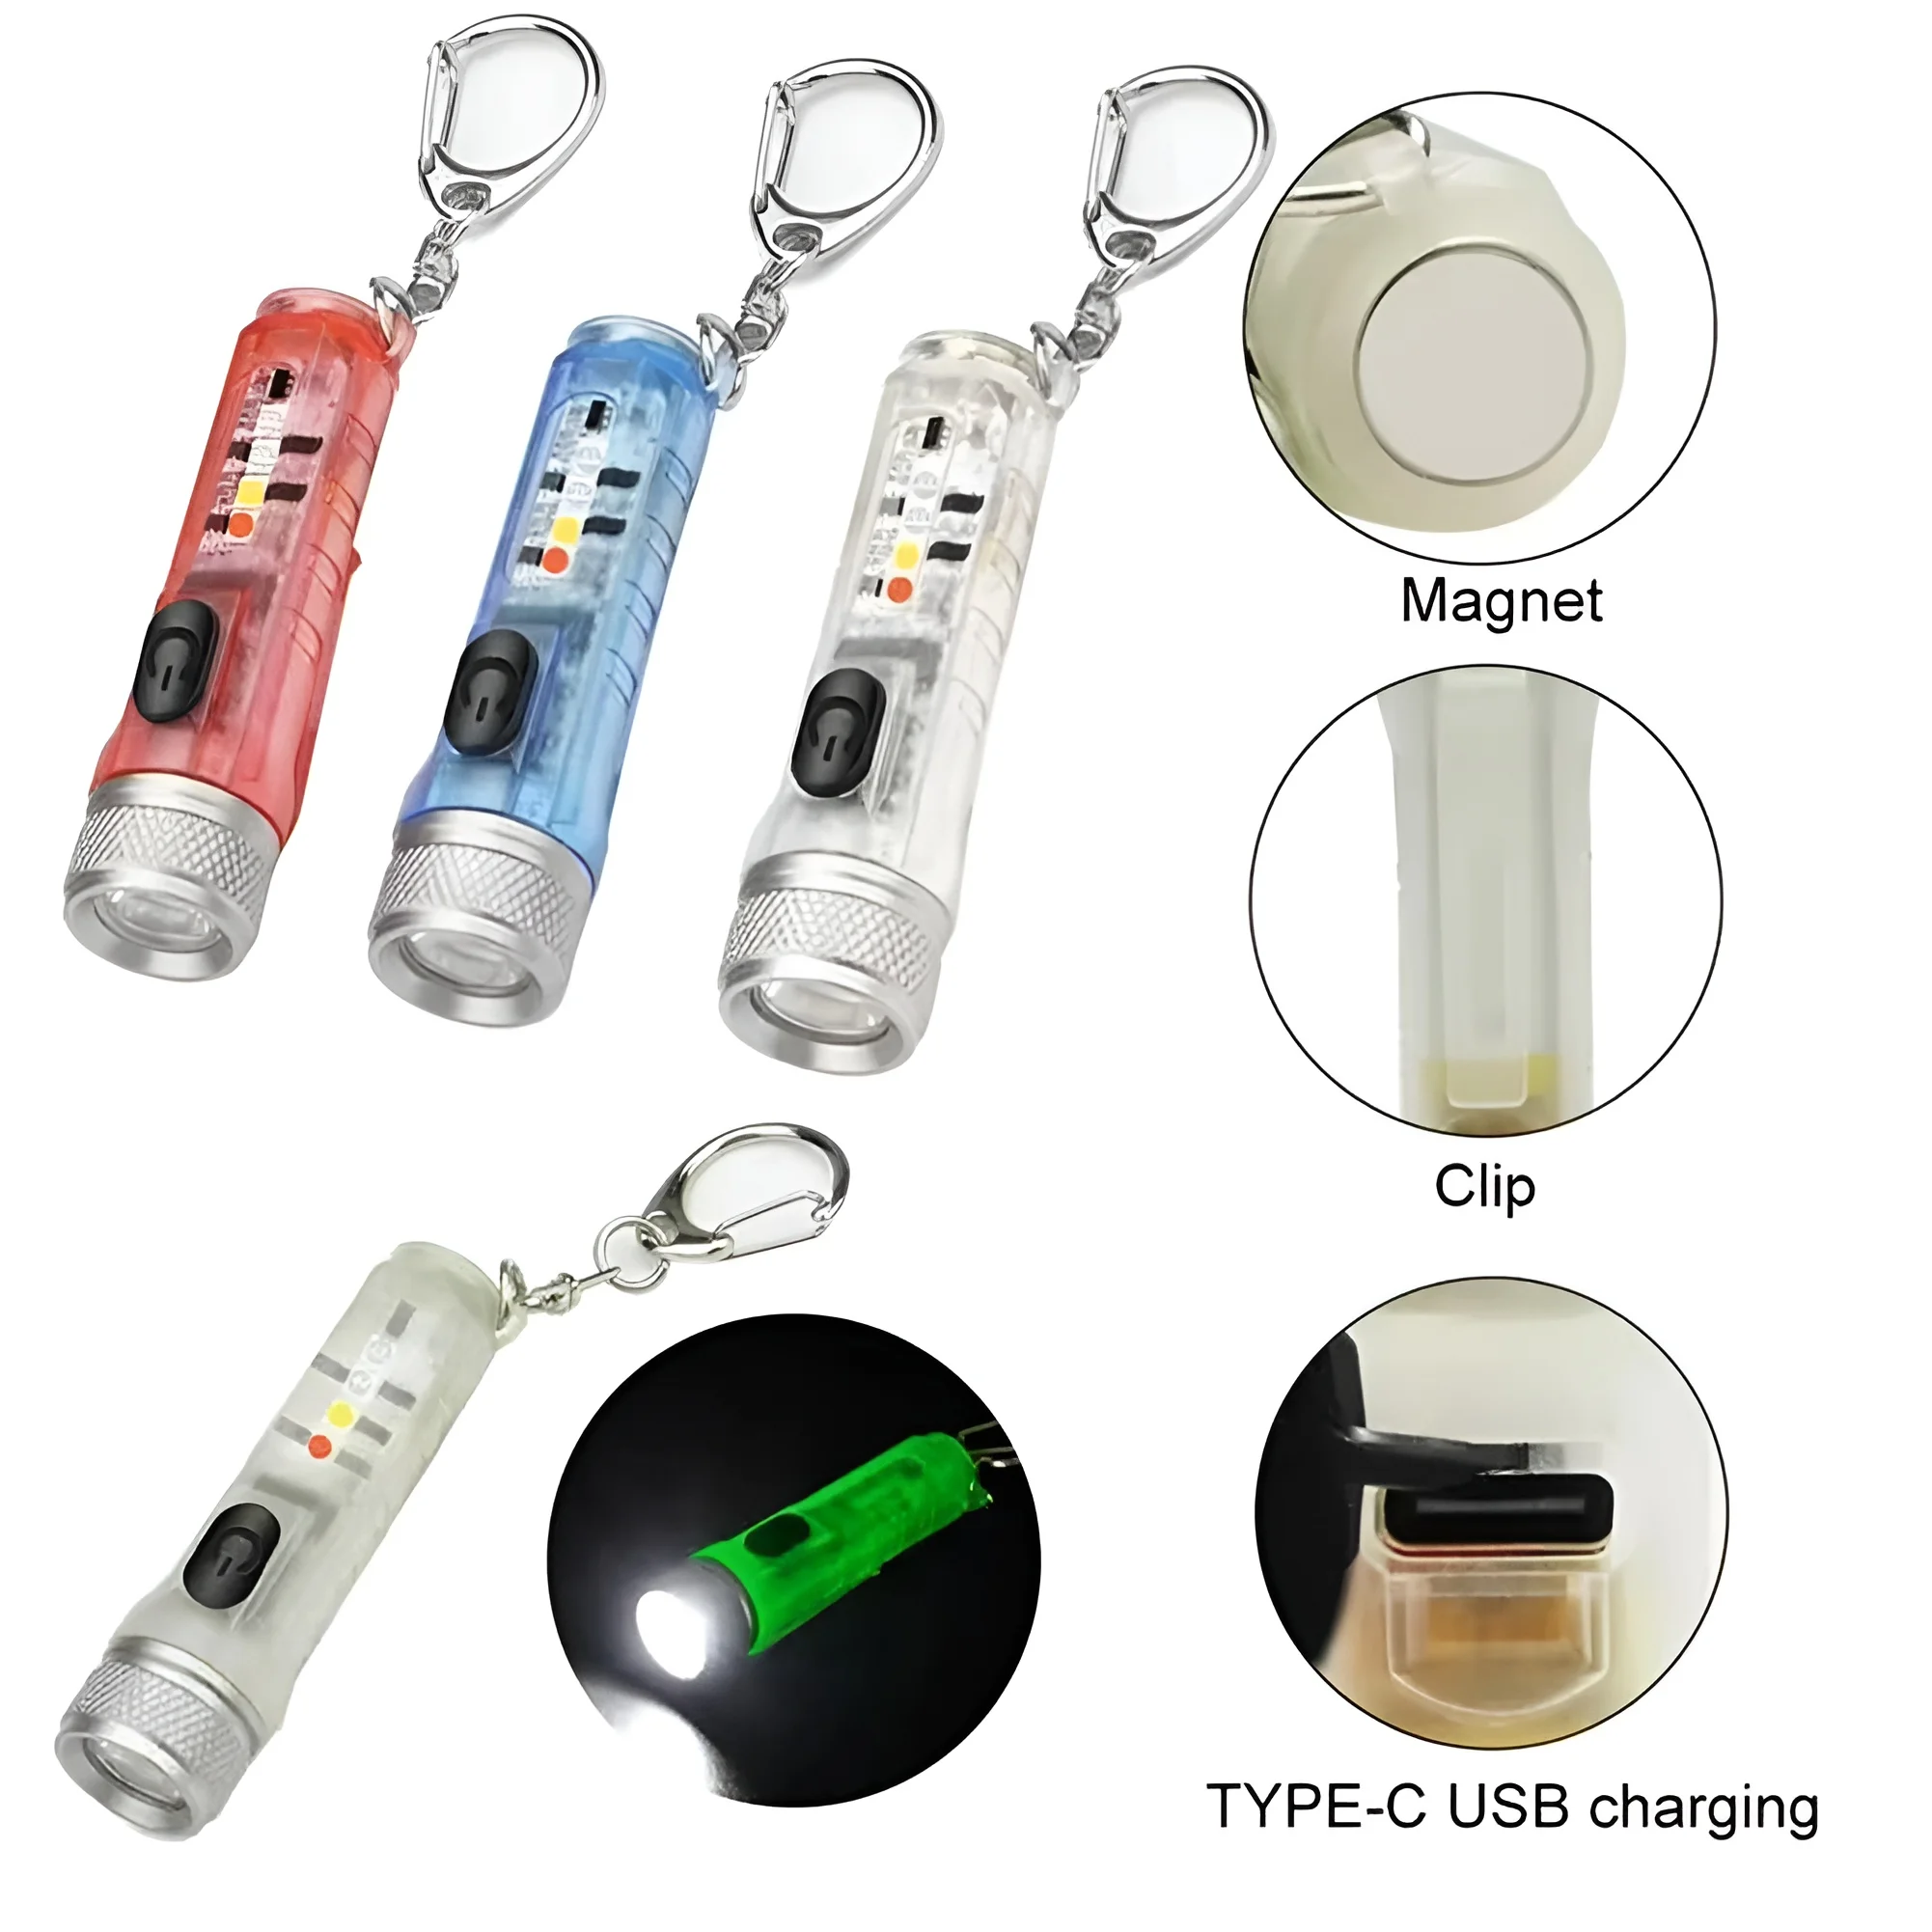 

FlashLight,LED Lights,Mini Lighting,Rechargeable Portable Anti-fall Waterproof Amazon with the Same Paragraph A8 EDC, USB Charge